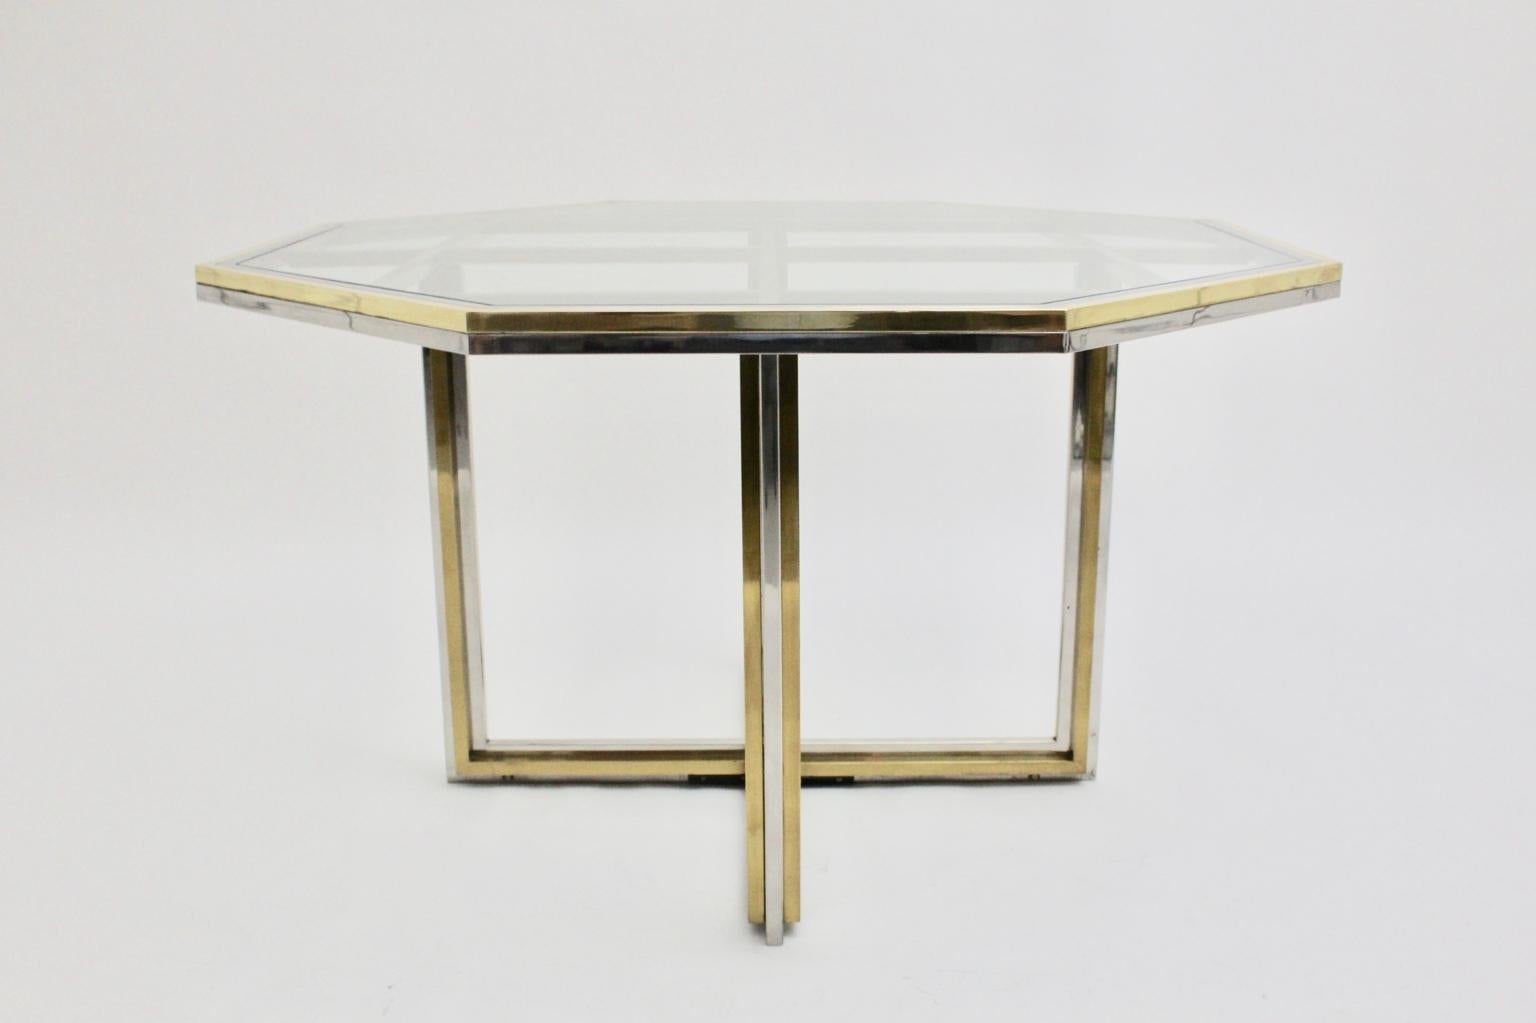 Metal Romeo Rega Style Italian Glass and Brass Chromed Vintage Dining Table, 1970s For Sale